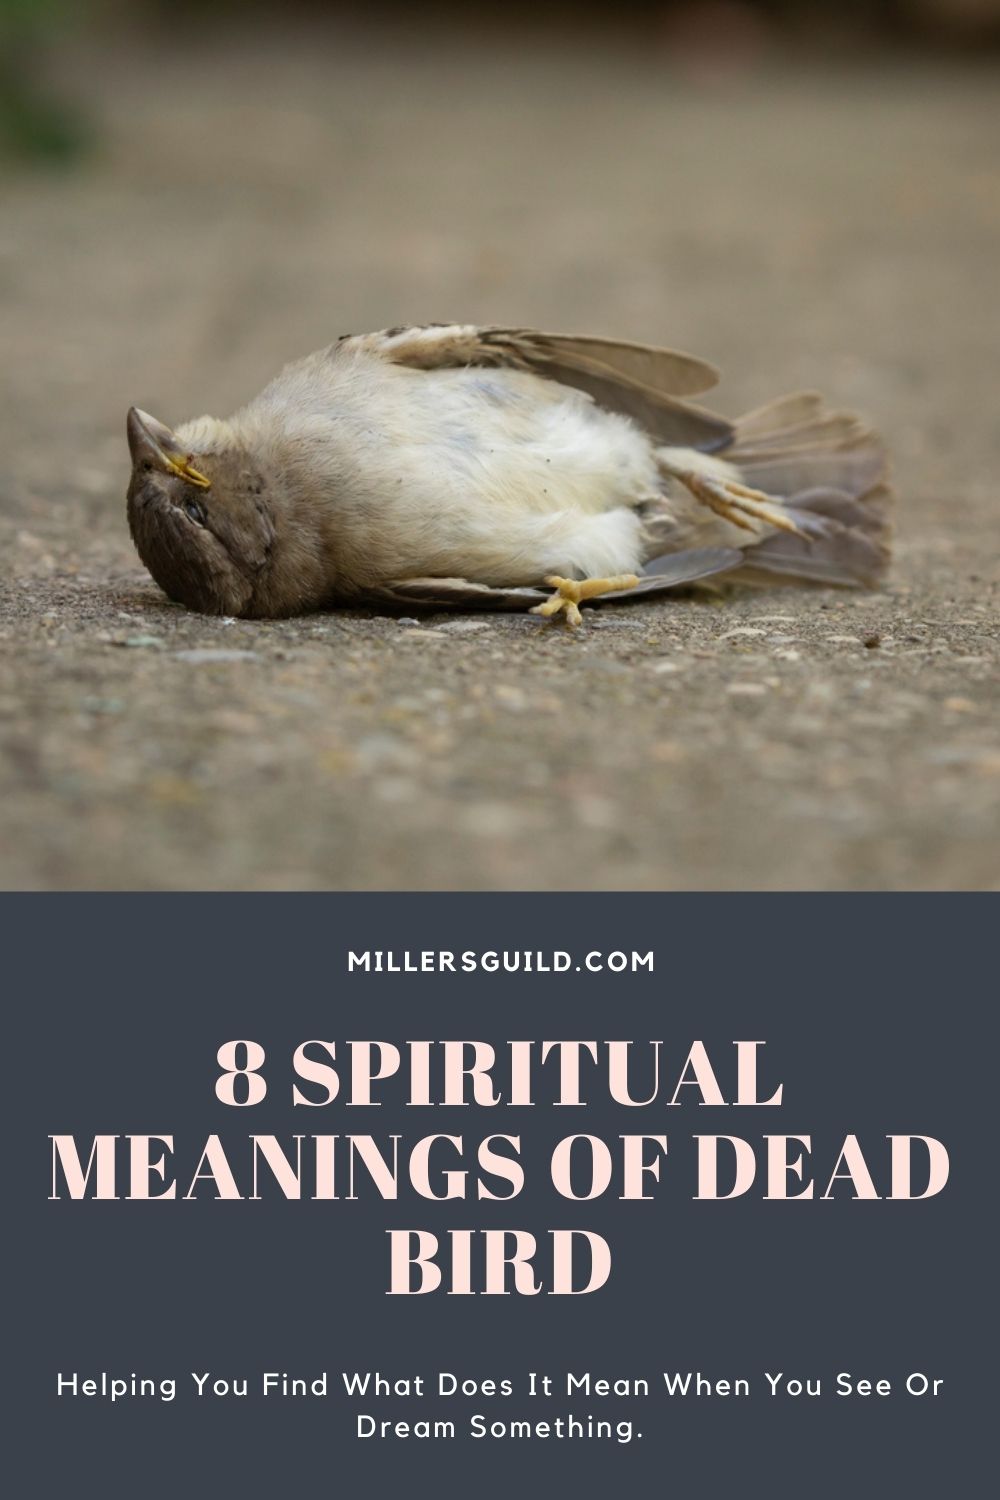 2. Symbolic Meaning Of Dead Bird In Your Yard